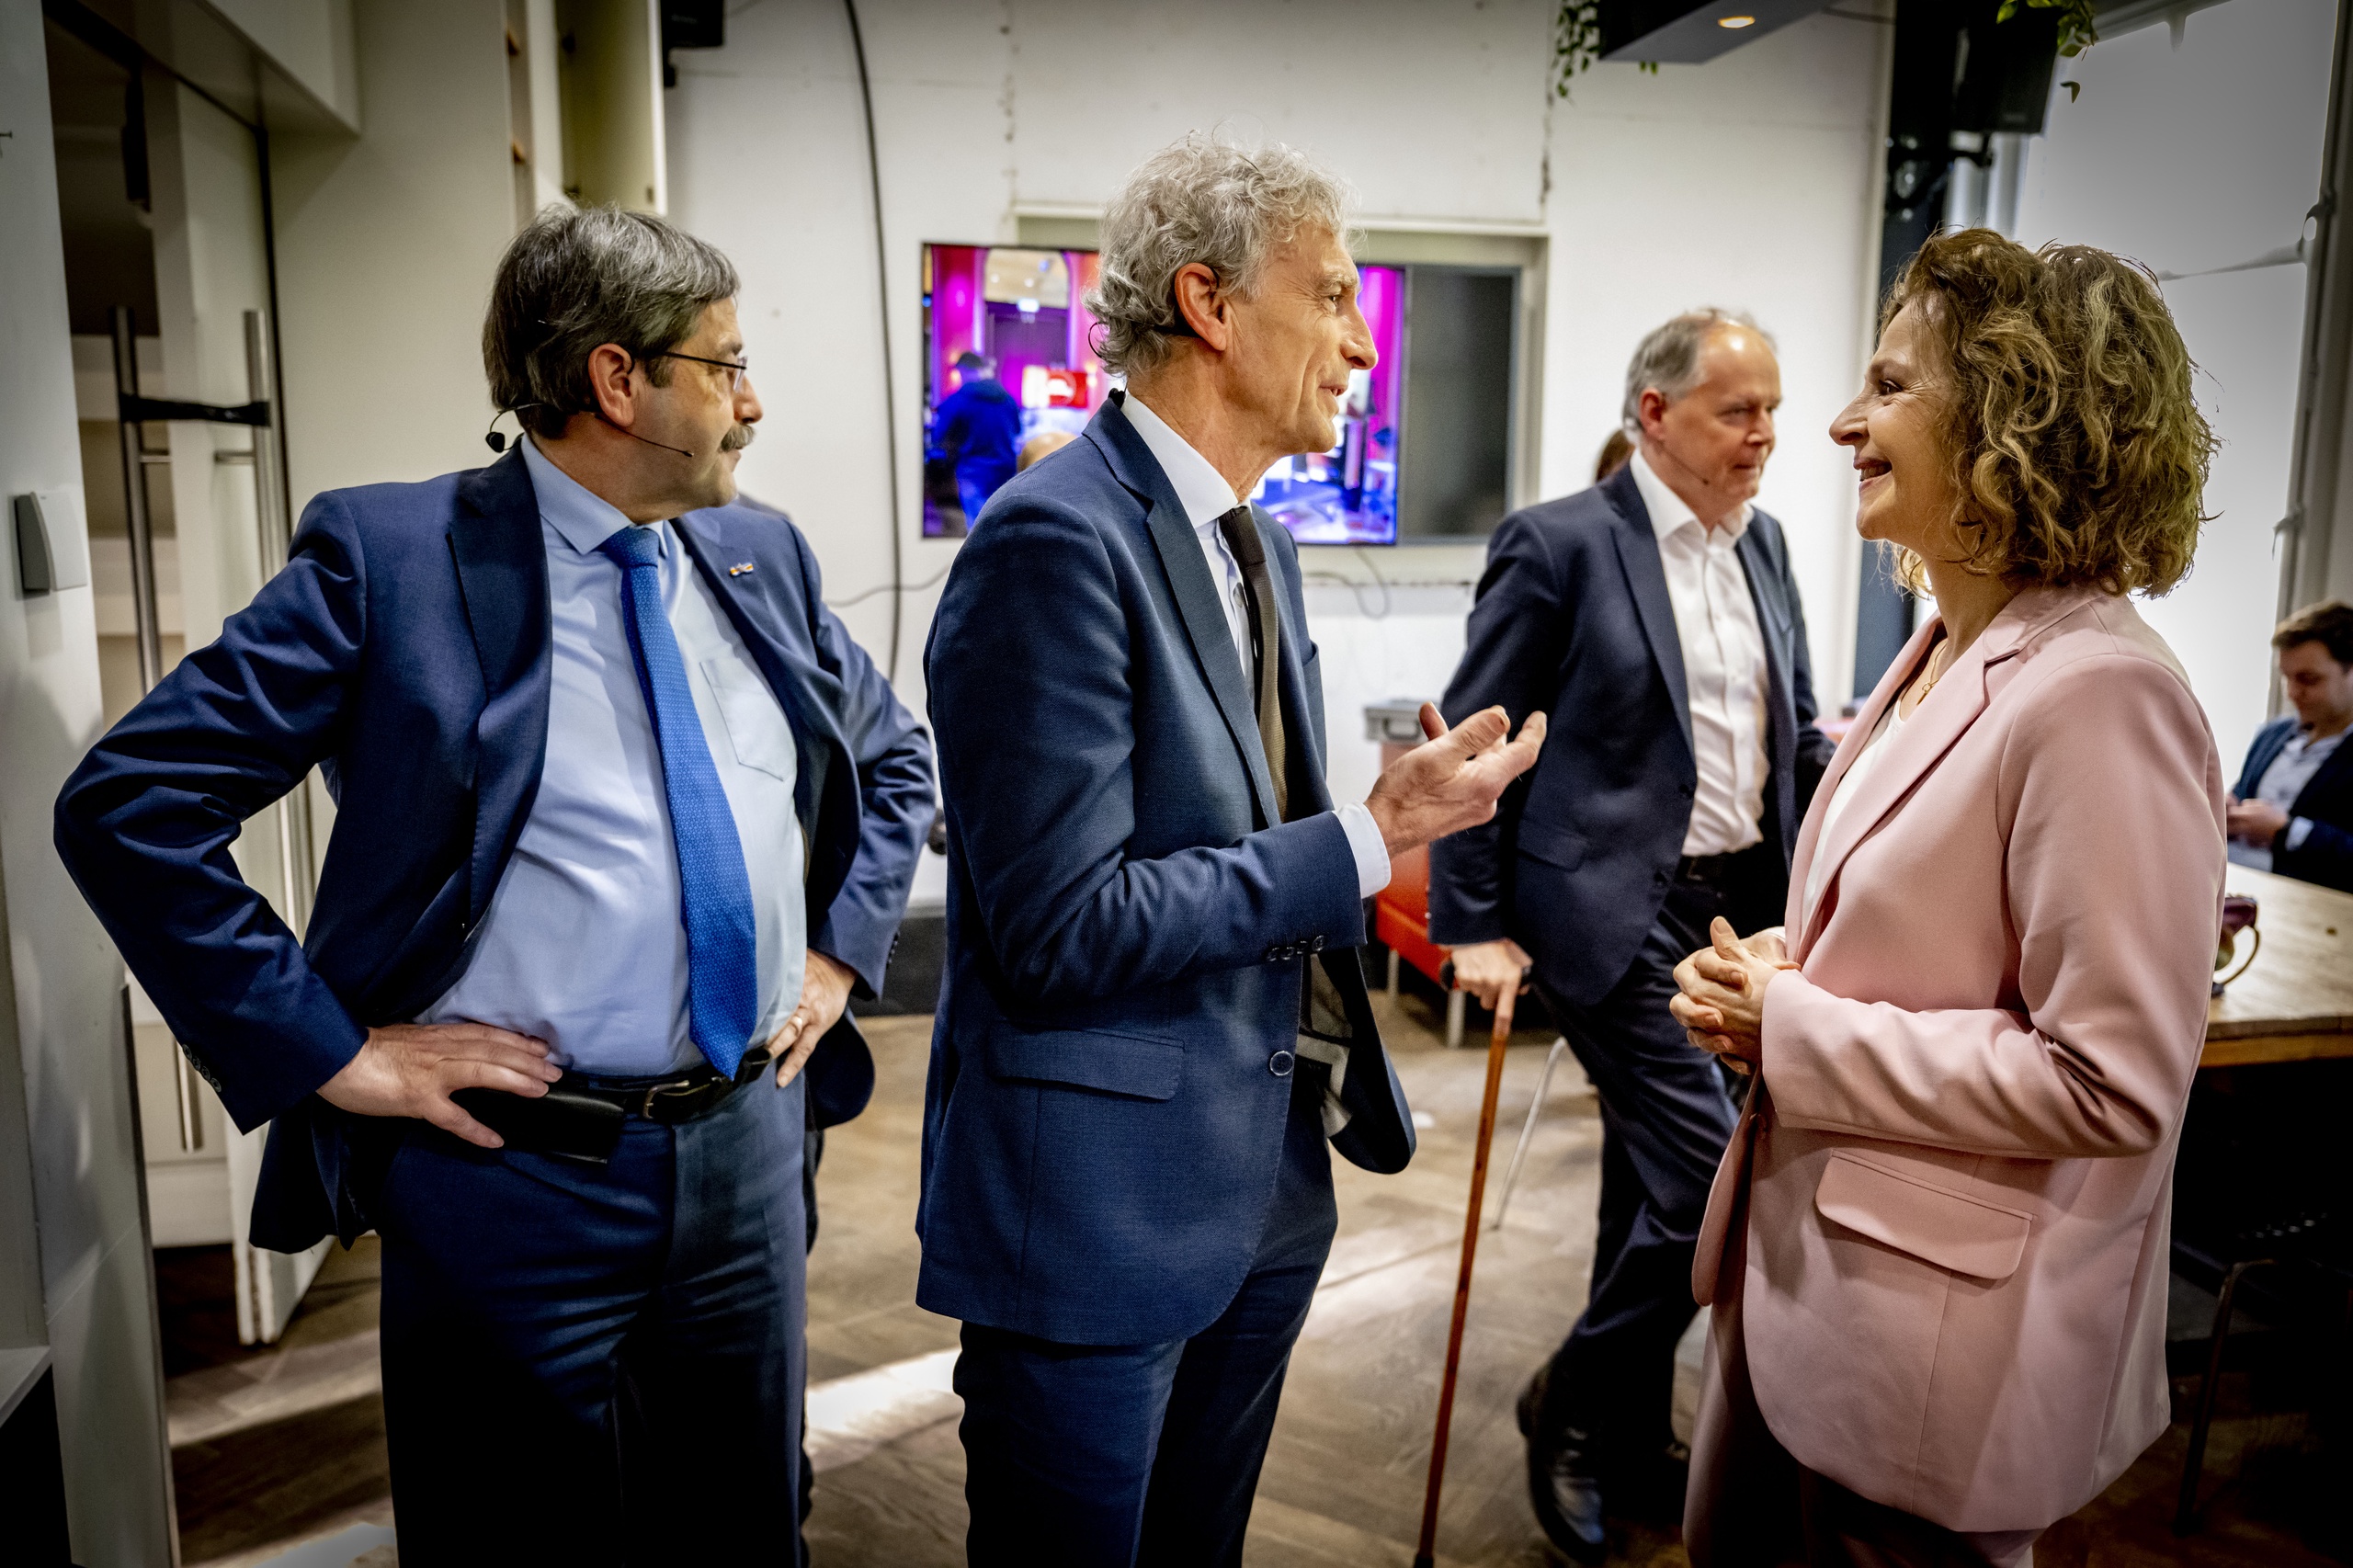 The leaders of the Senate lists of coalition parties VVD, D66 and CDA clashed about nitrogen policy during a WNL television debate.  In a vote on the importance of the nitrogen target for 2030, all three voted differently.